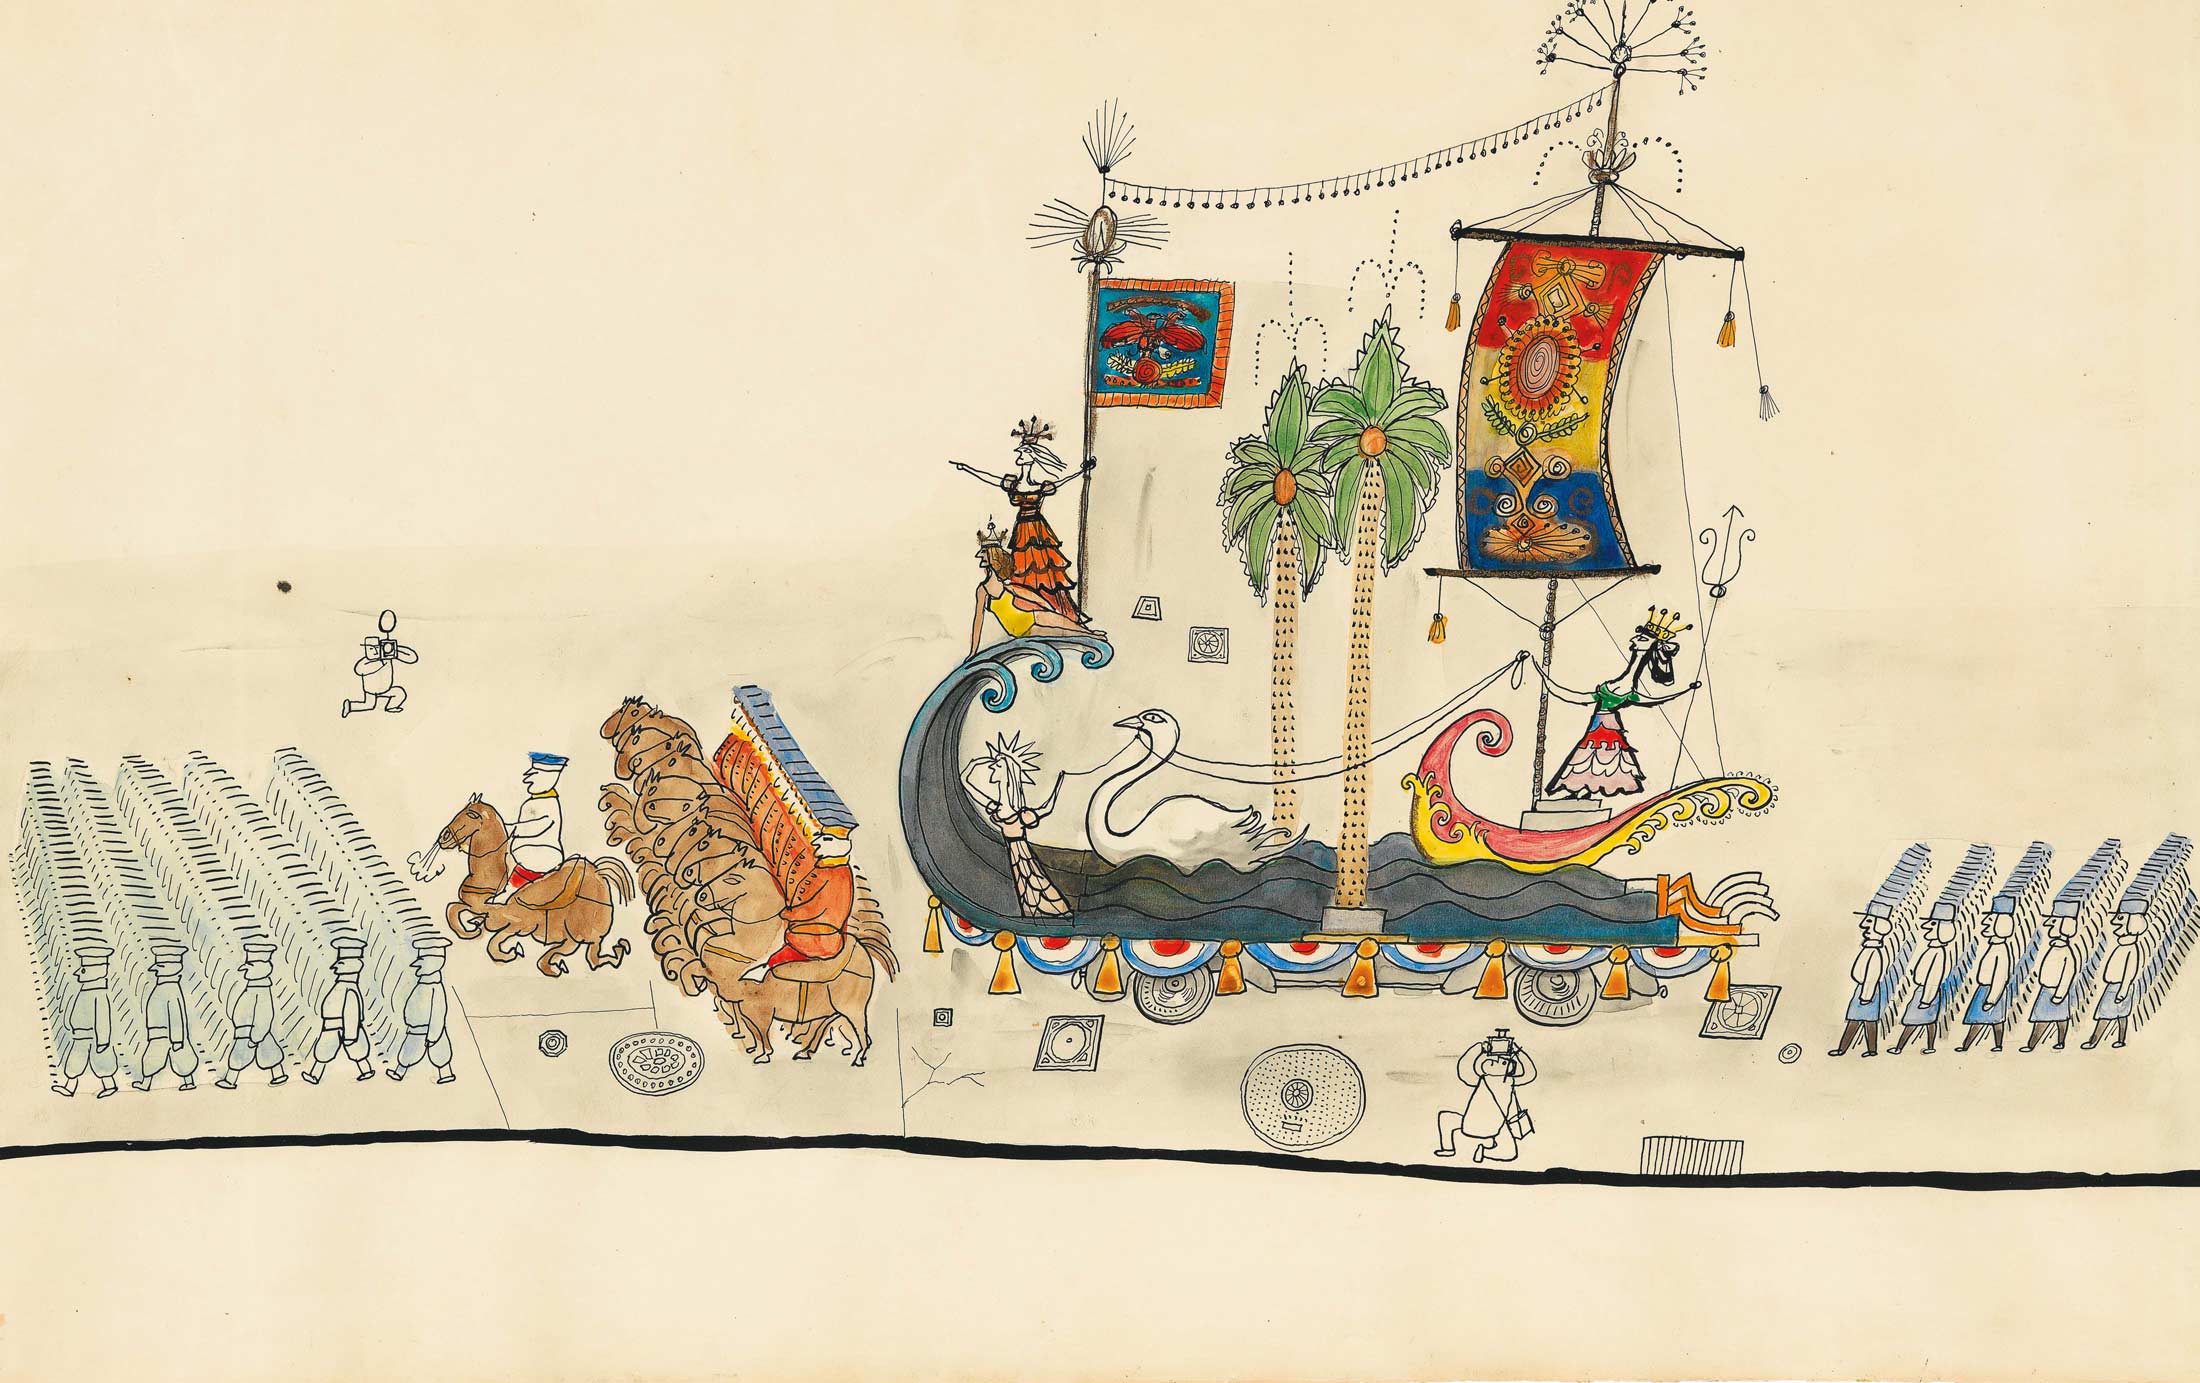 Panel 3 of <em>Parade</em>, 1951. Ink, crayon, and gold paper on paper, 14 9/16 x 23 1/16 in. The Metropolitan Museum of Art, New York; Purchase, Elihu Root, Jr. Gift and Rogers Fund.